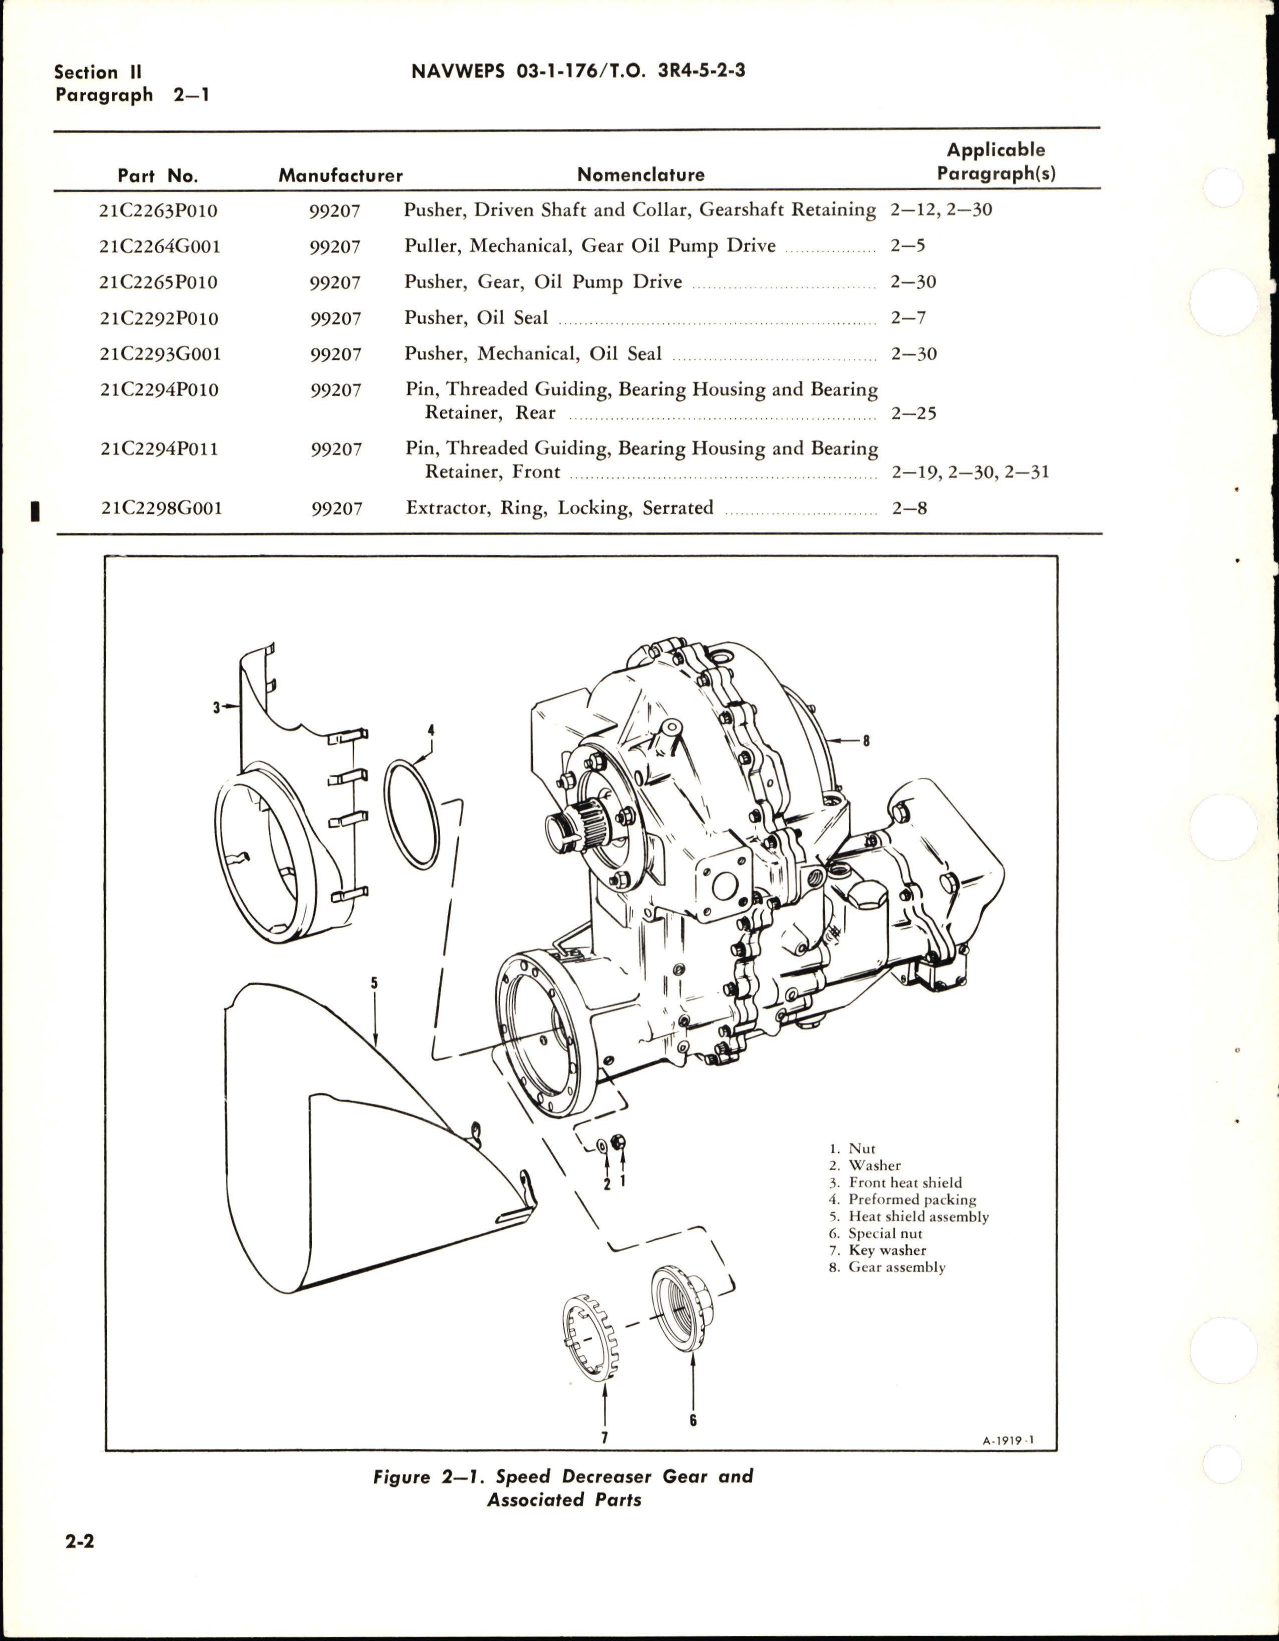 Sample page 8 from AirCorps Library document: Overhaul Instructions for Speed Decreaser Gear and Associated Parts - Parts 37R600175G001 and 37R600175G009 